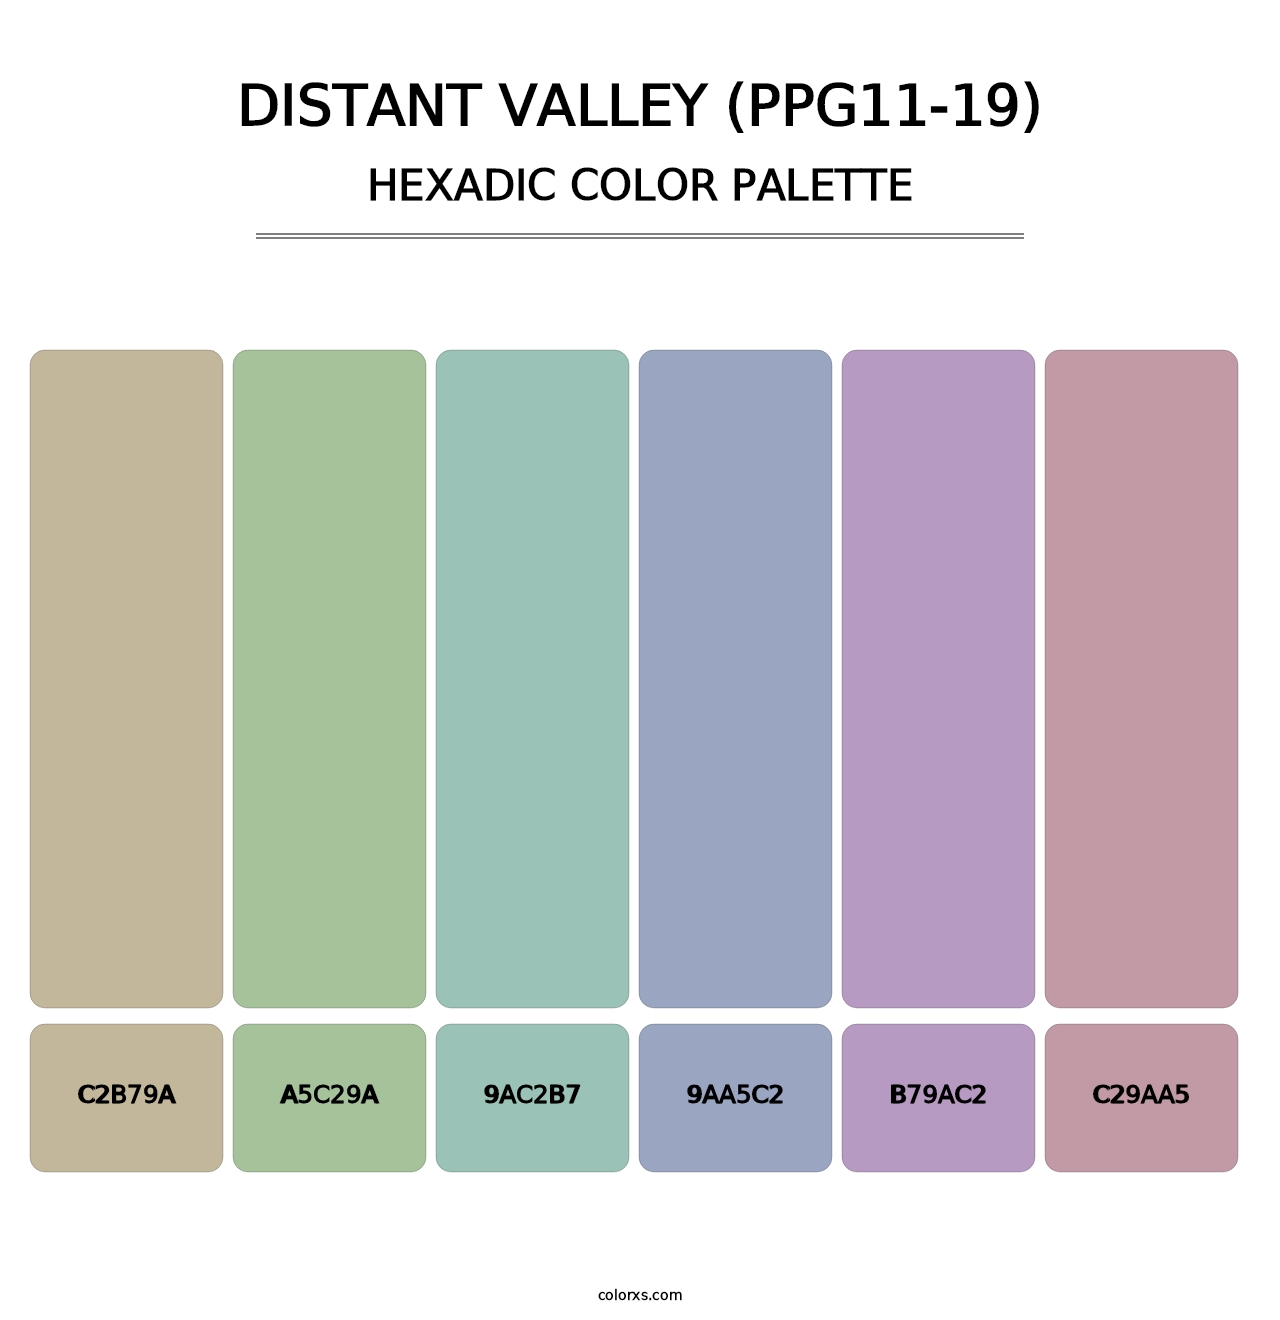 Distant Valley (PPG11-19) - Hexadic Color Palette